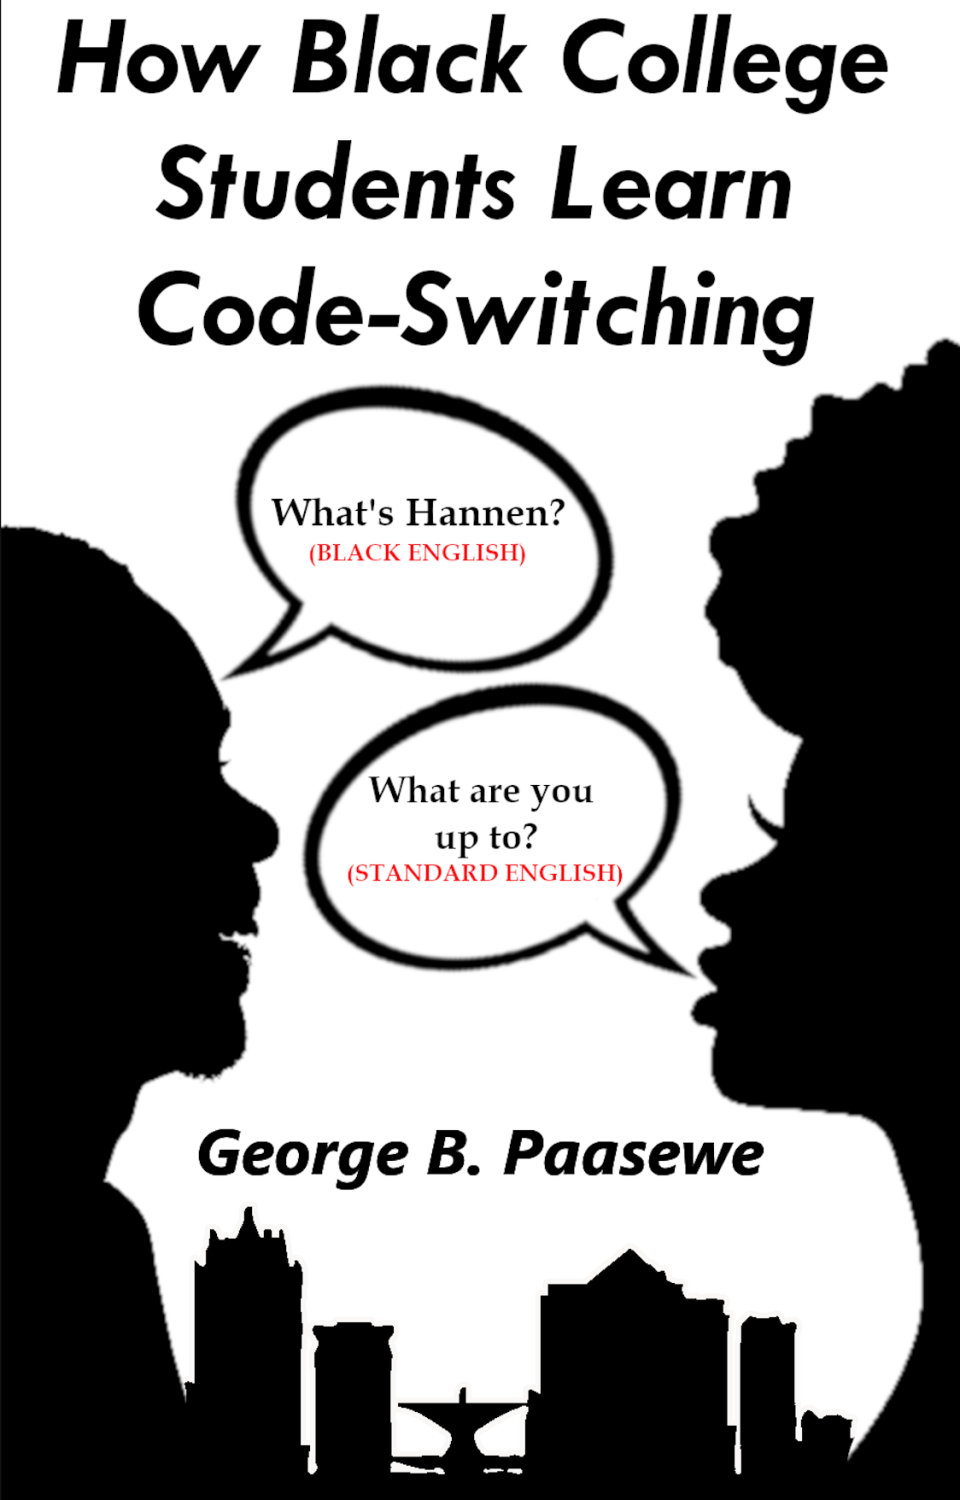 The 2020 book "How Black College Students Learn Code-Switching."